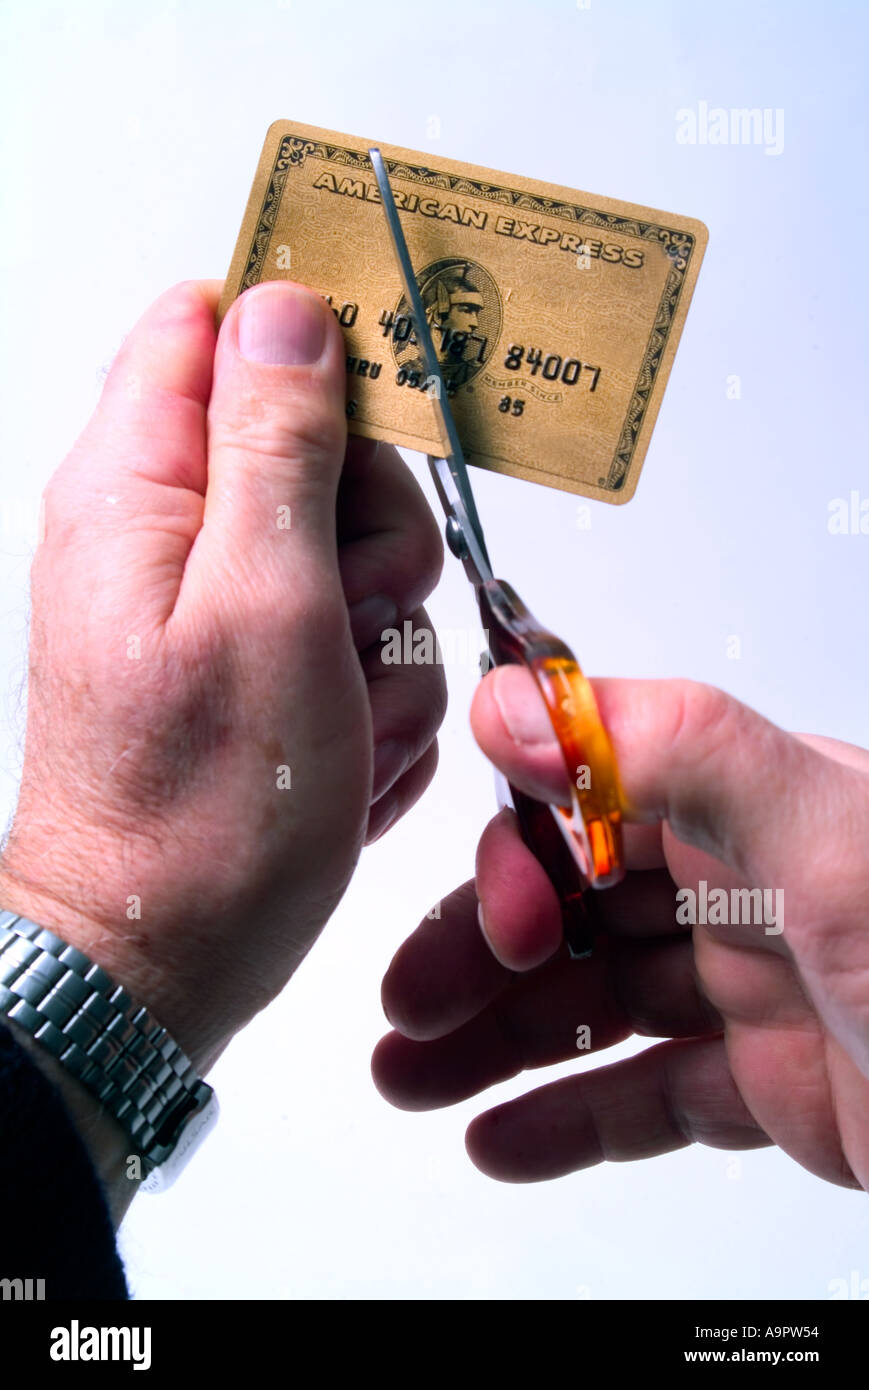 Cutting up Gold American Express credit card Stock Photo